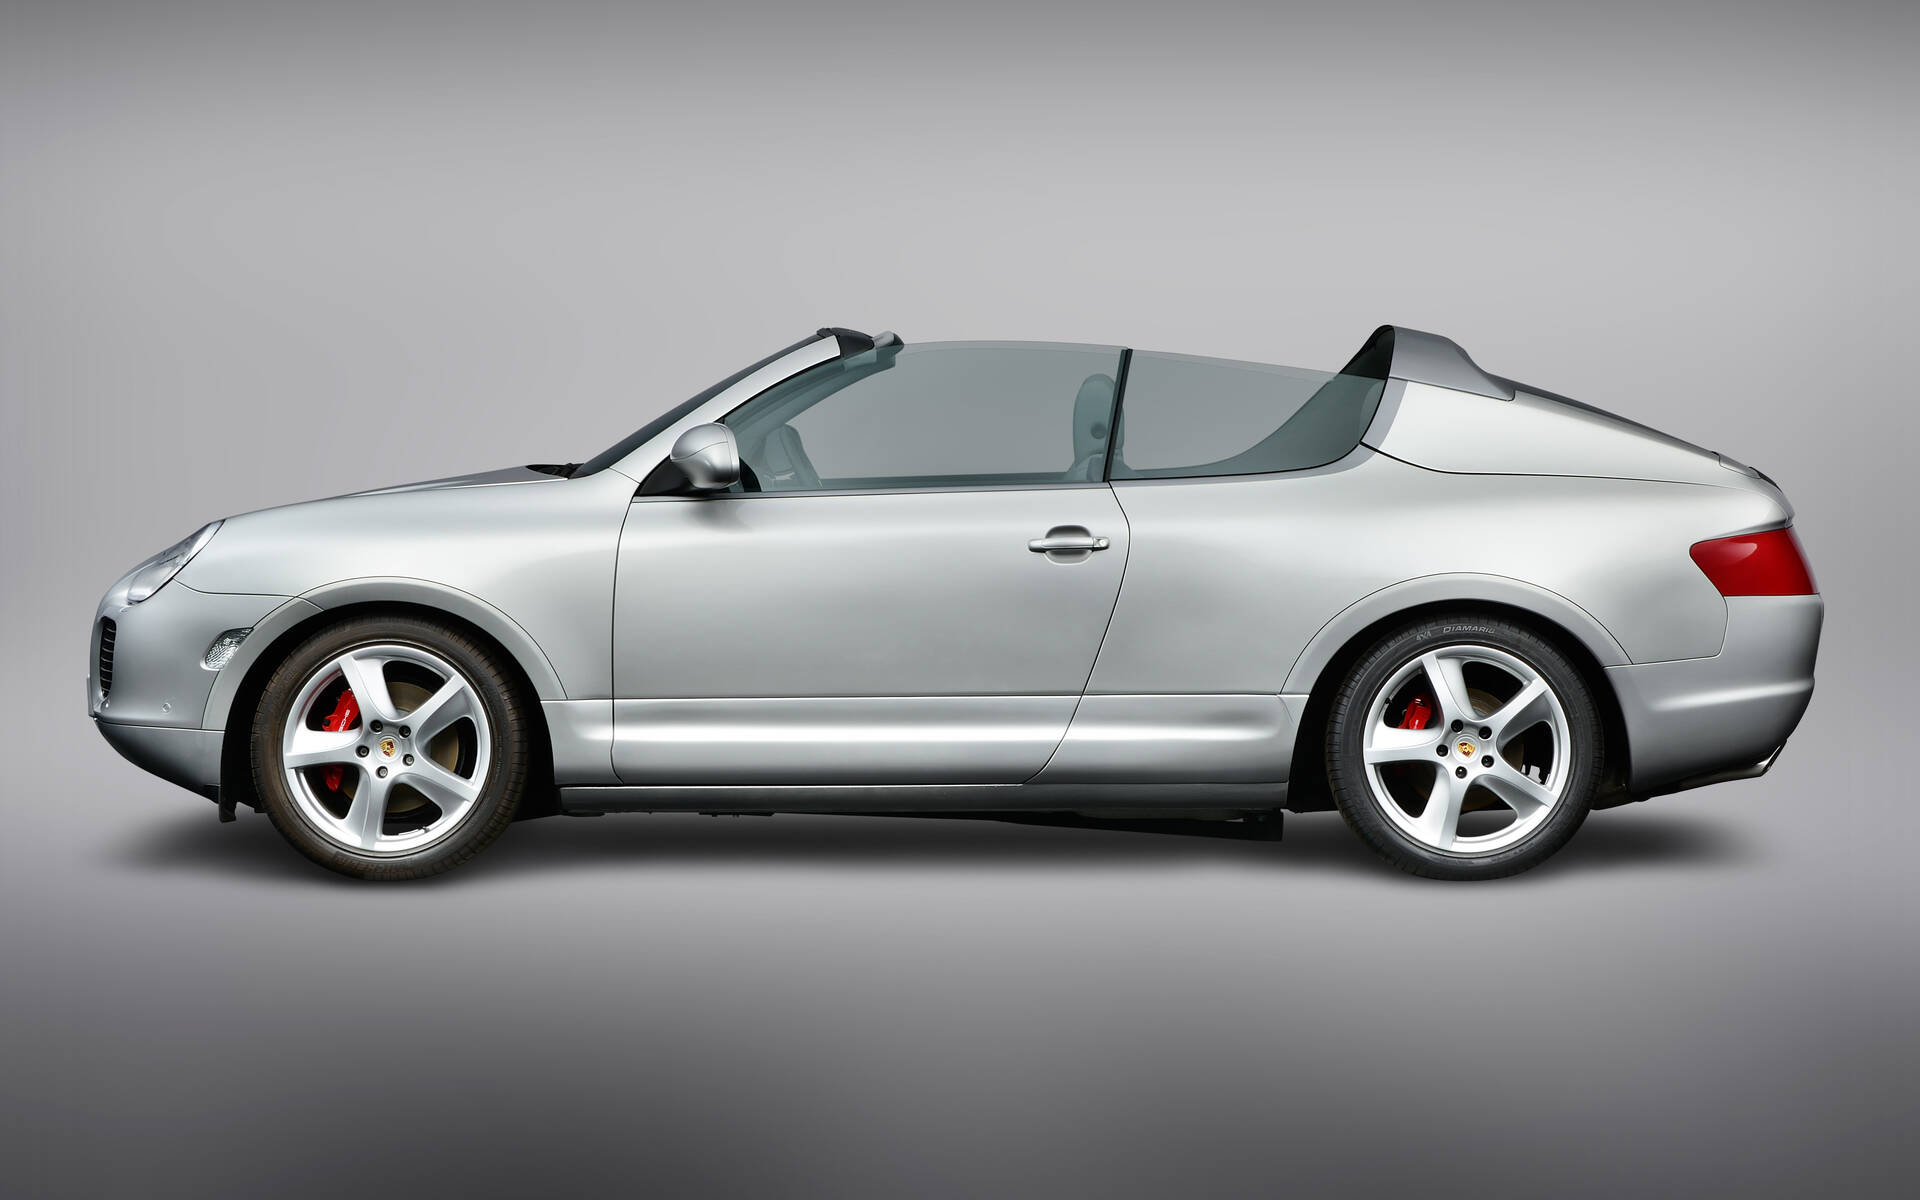 Porsche Once Envisioned a Cayenne Convertible - The Car Guide